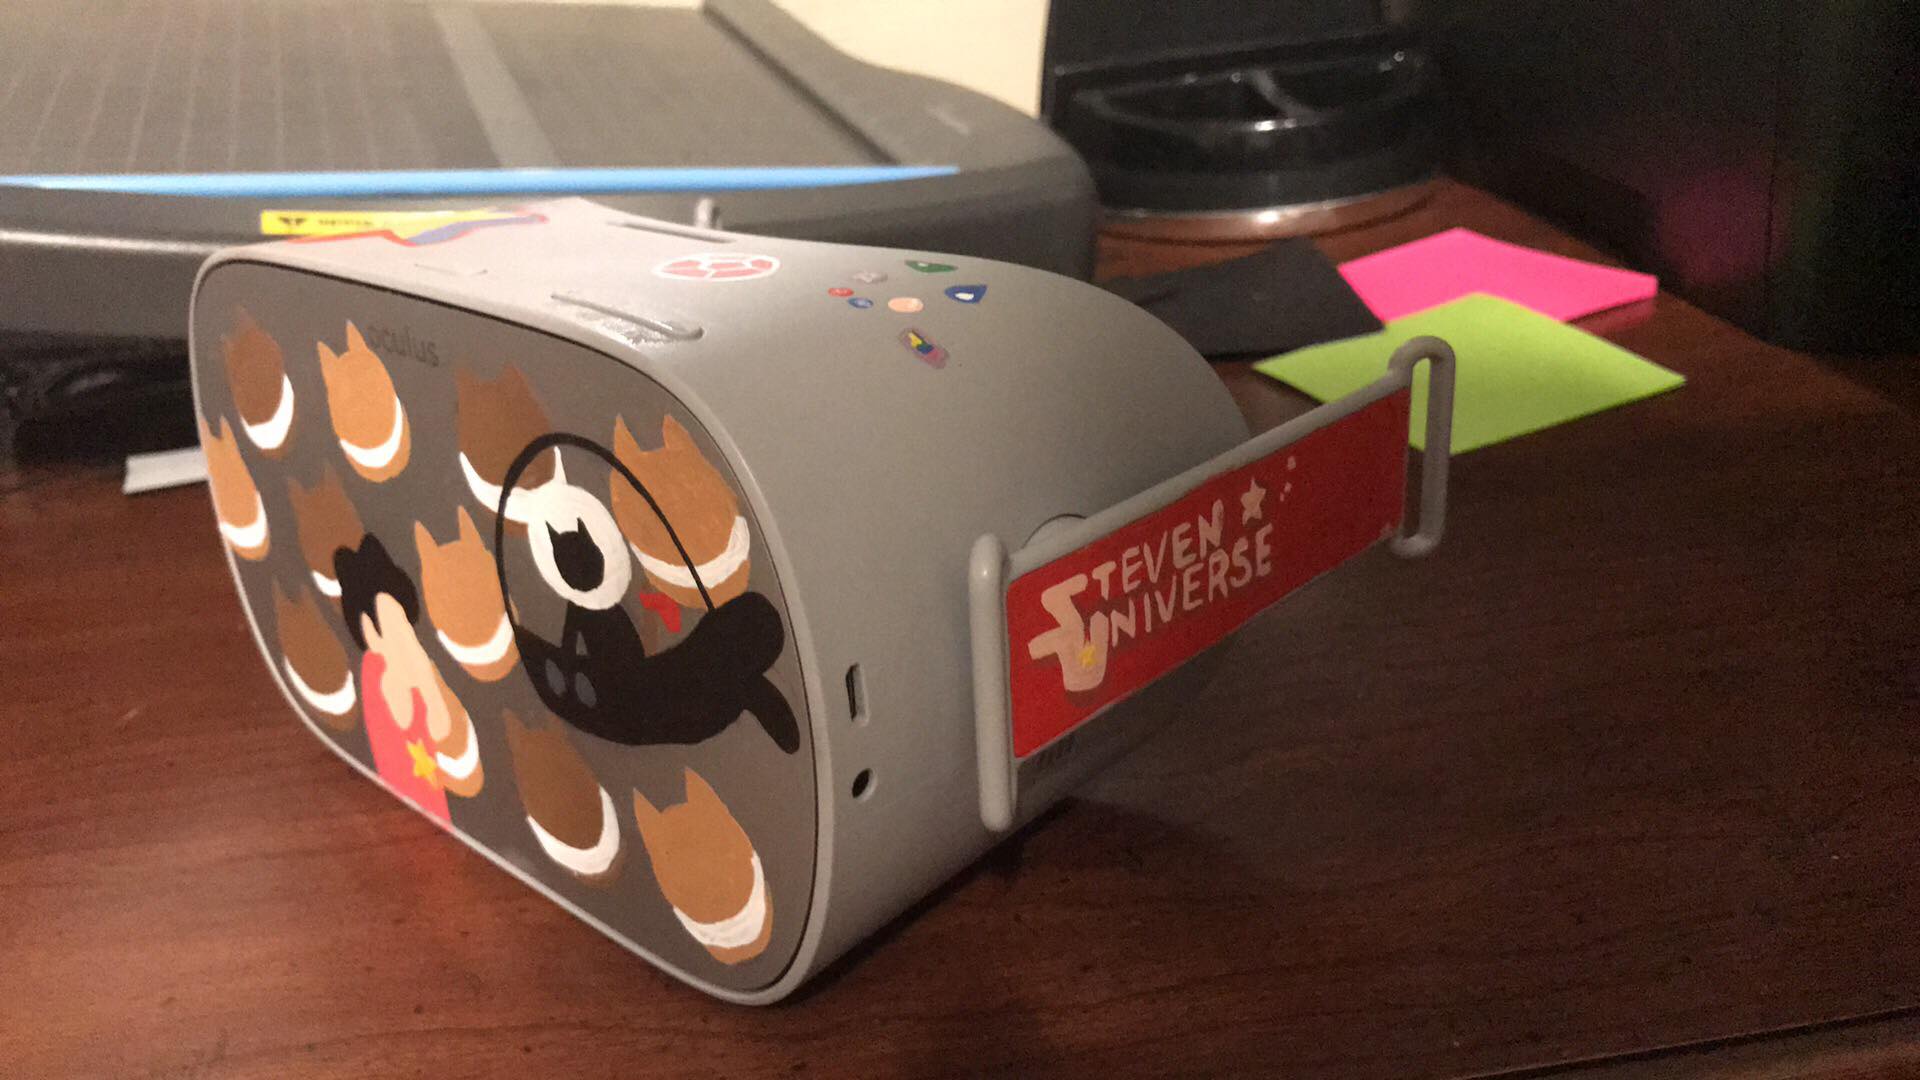 oculus quest googly eyes. customize and decorate your Oculus Go. 